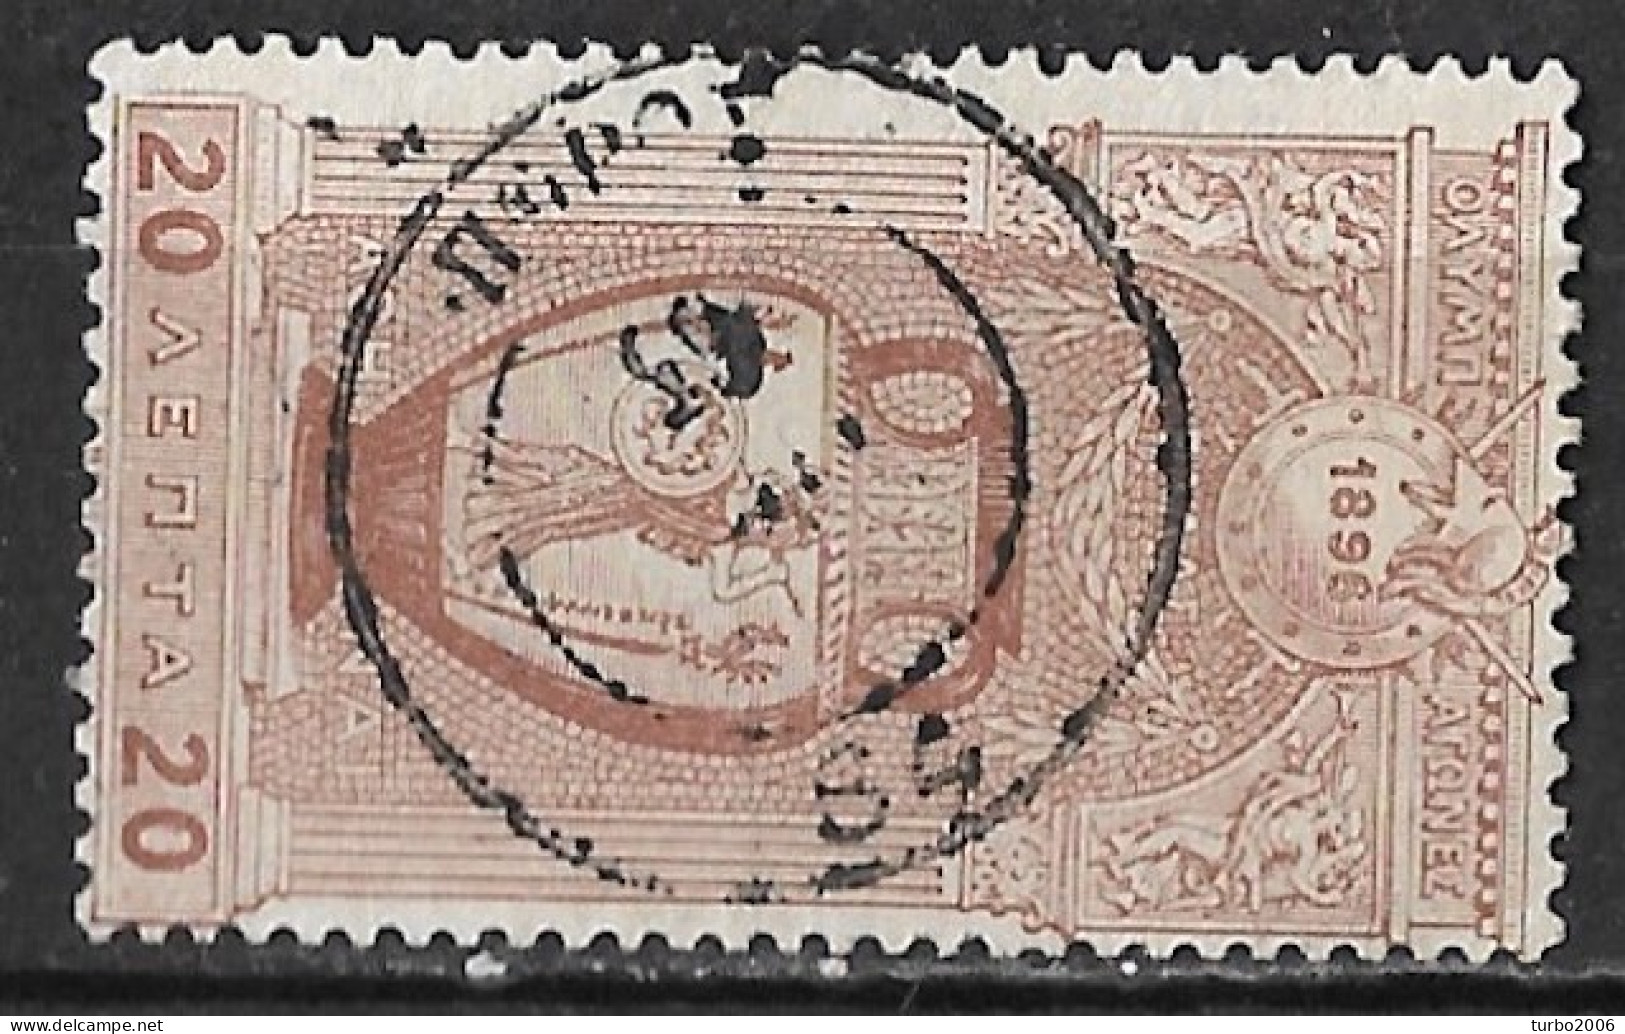 Greece 1896 Cancellation ΠΟΡΟΣ 64 Type III On 1896 First Olympic Games 20 L Brown Vl. 137 - Oblitérés